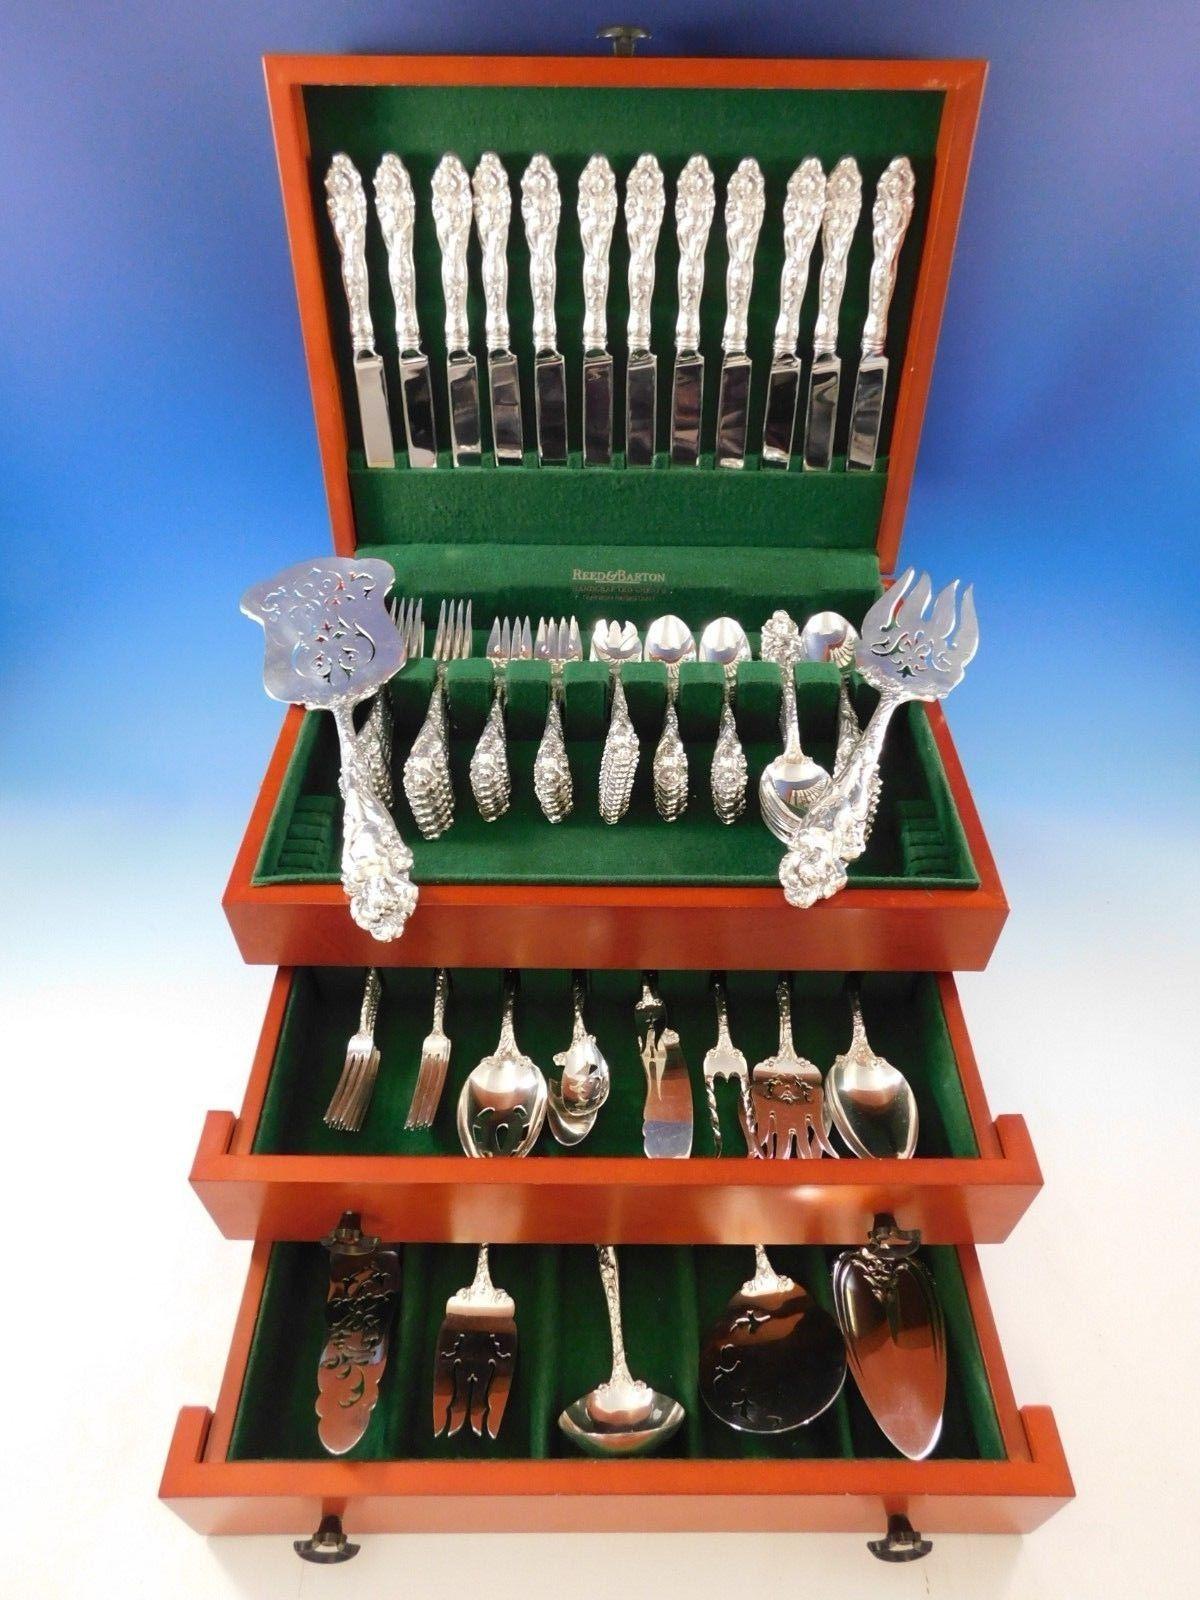 Masterfully crafted Love Disarmed by Reed & Barton sterling silver flatware set, 100 pieces. This set includes:

12 knives, 9 1/4